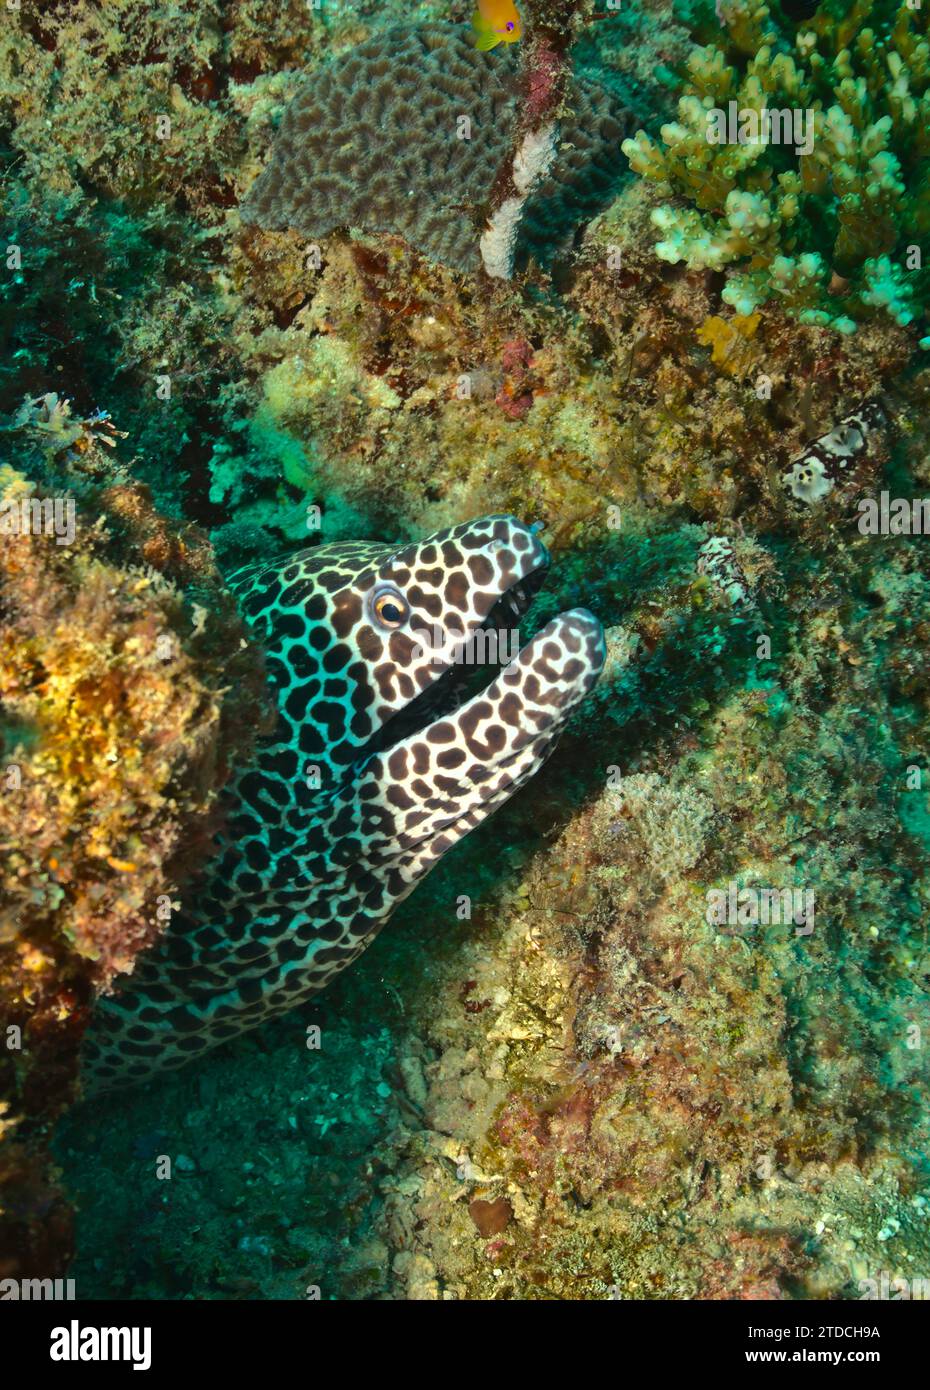 beautiful shy leopard or laced moray eel hiding and peeking out in a crevice in the coral reefs of watamu marine park, kenya Stock Photo